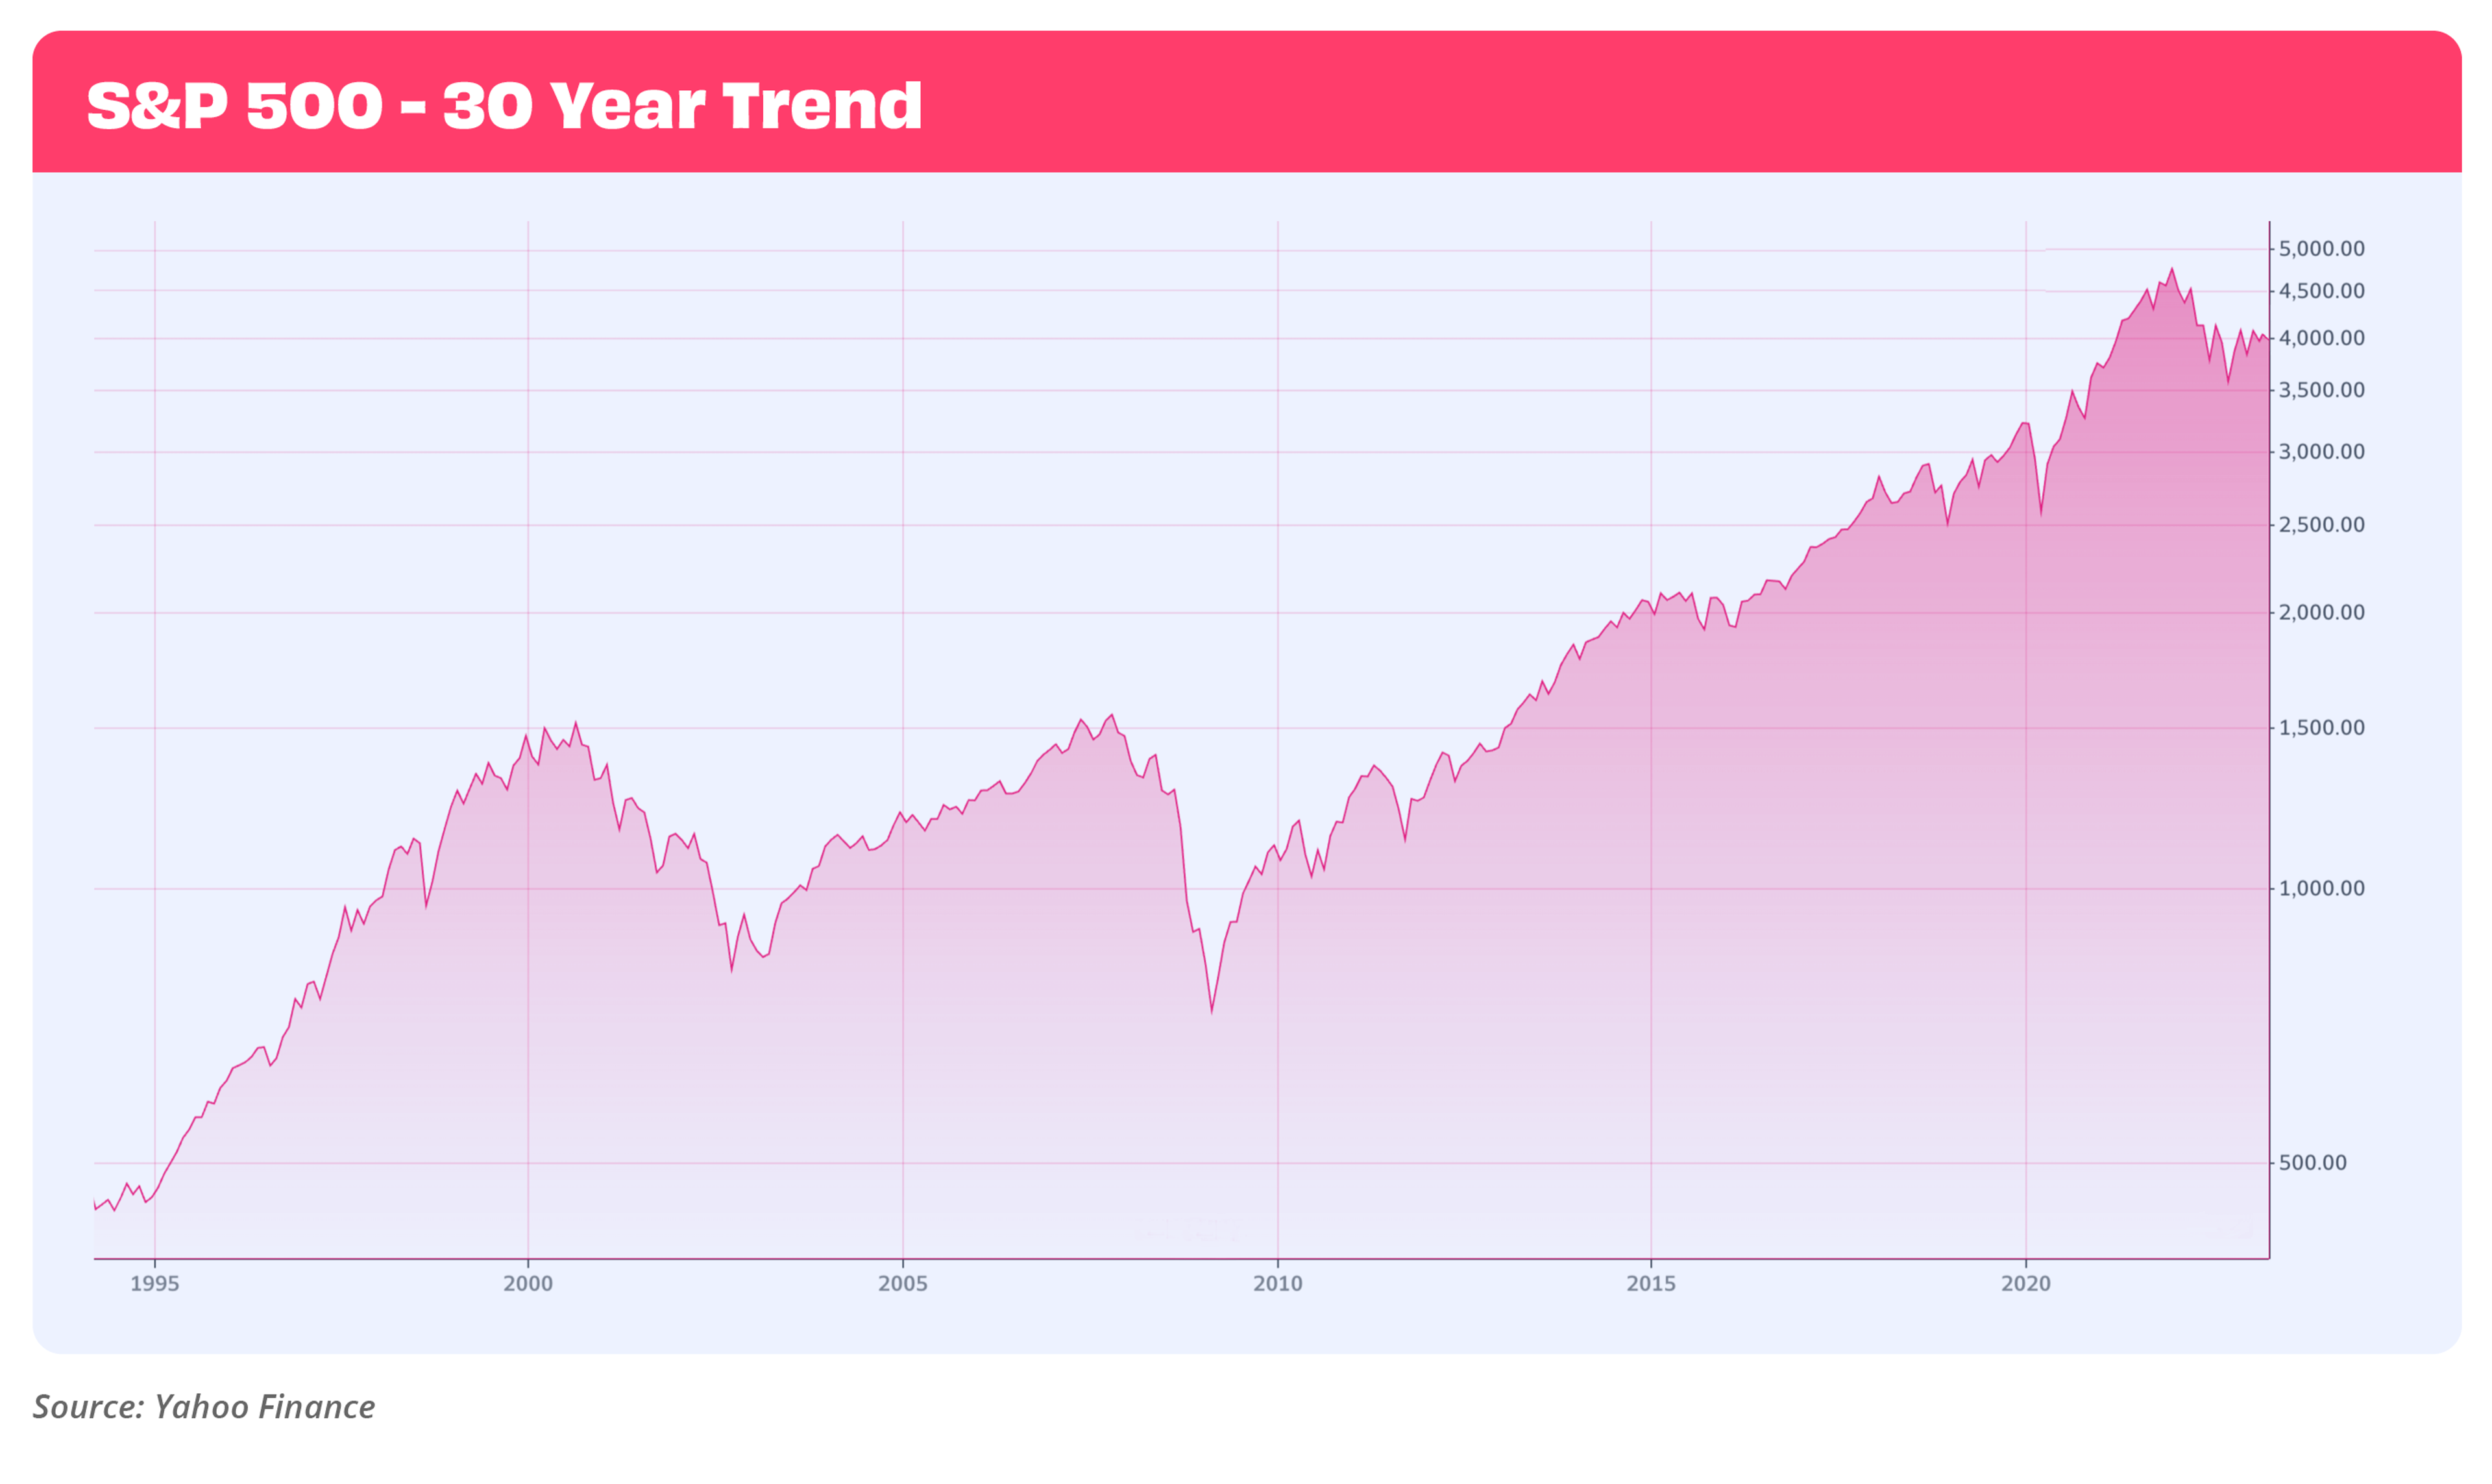 Line chart showing S&P500 30 year trend up until March 2023